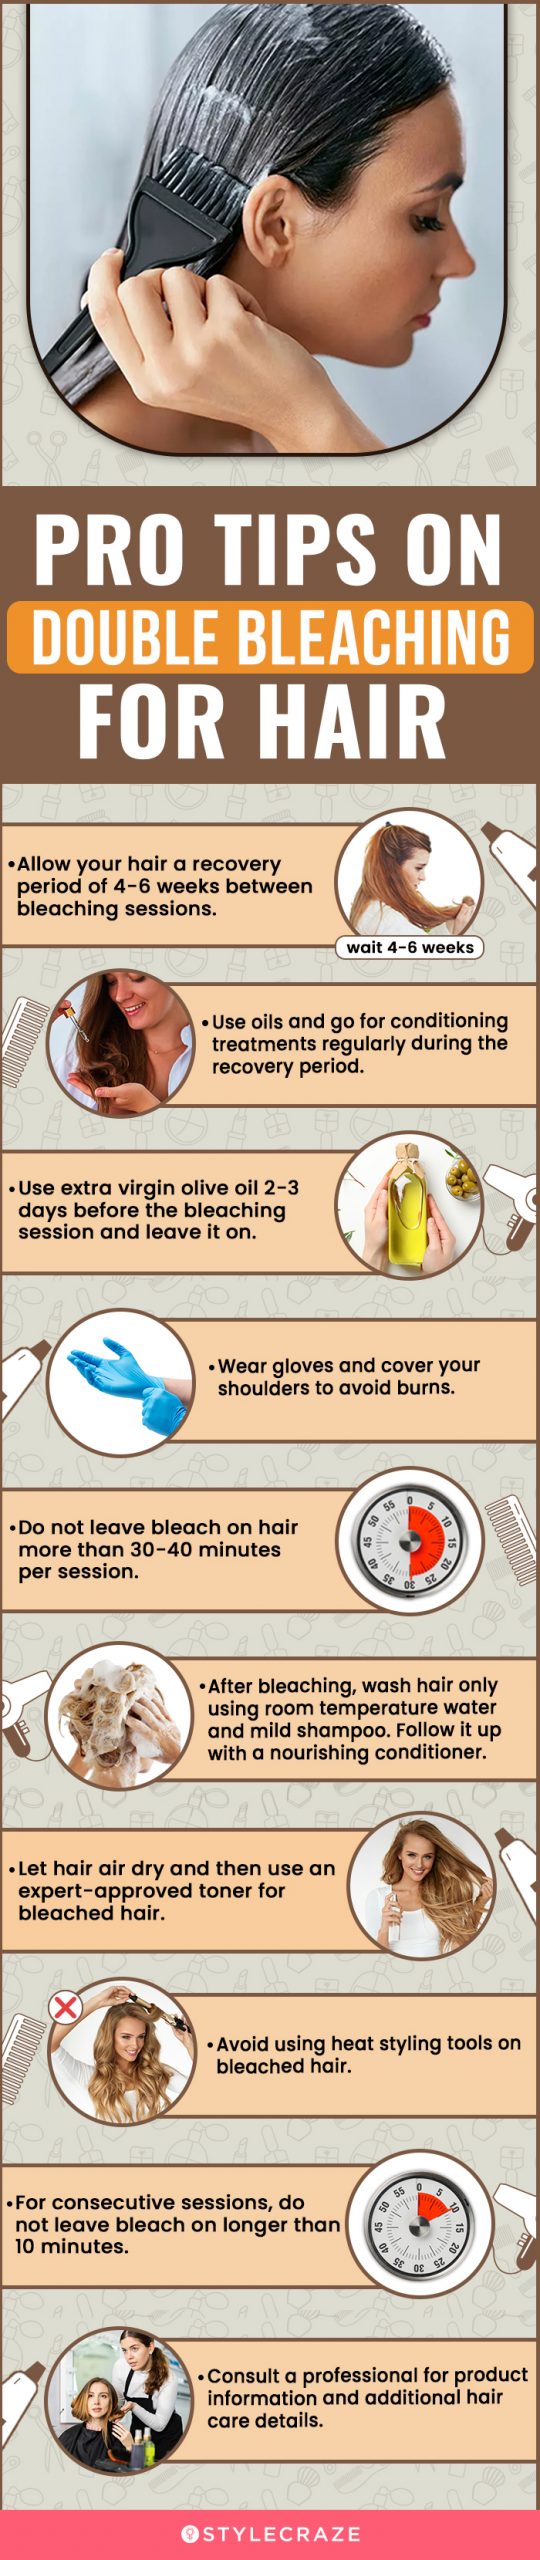 pro tips on double bleaching for hair [infographic]